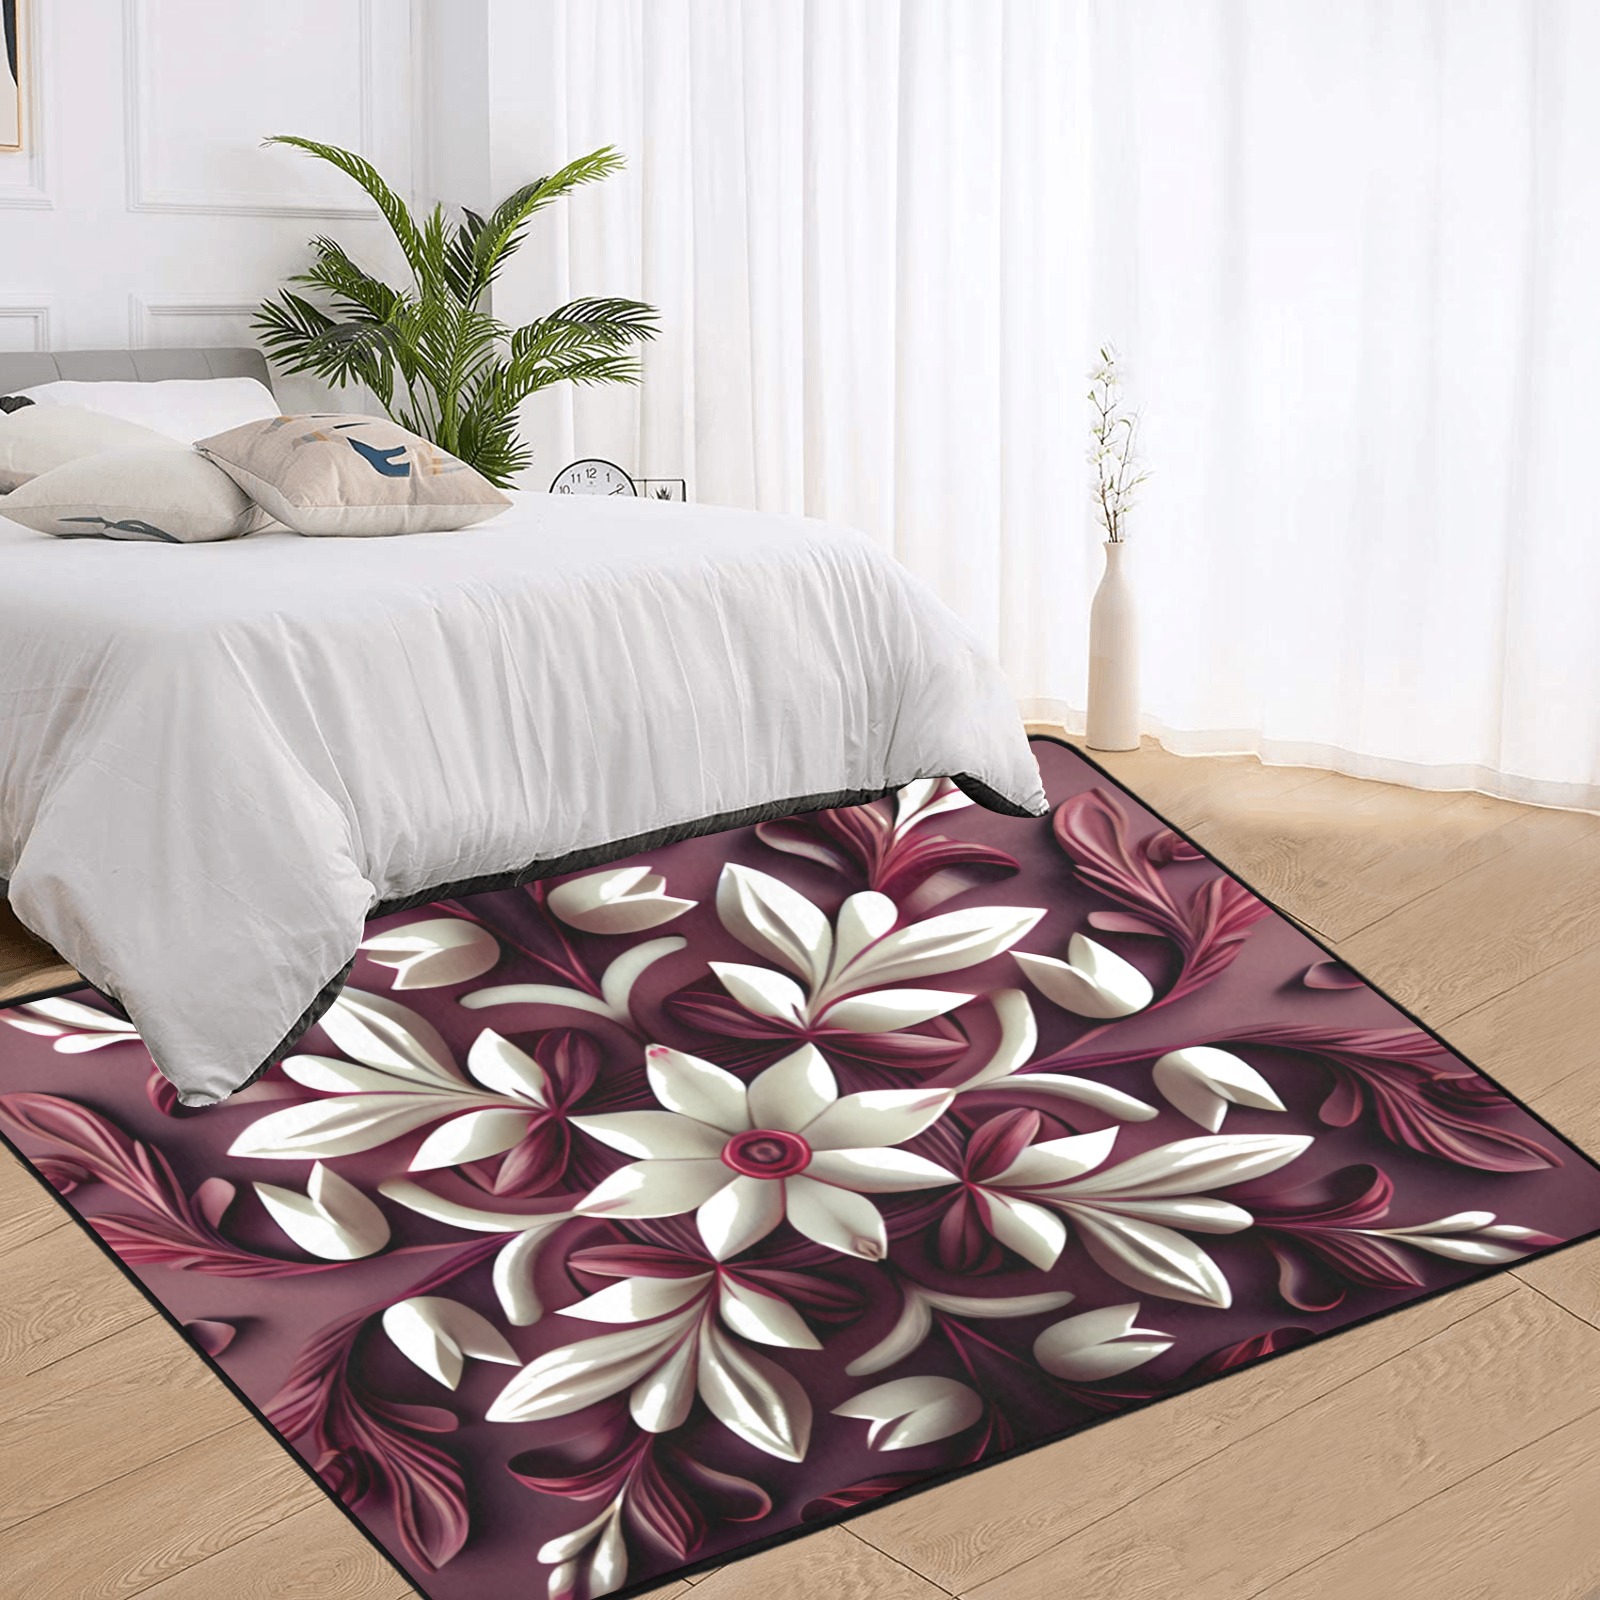 burgundy and white floral pattern Area Rug with Black Binding 7'x5'